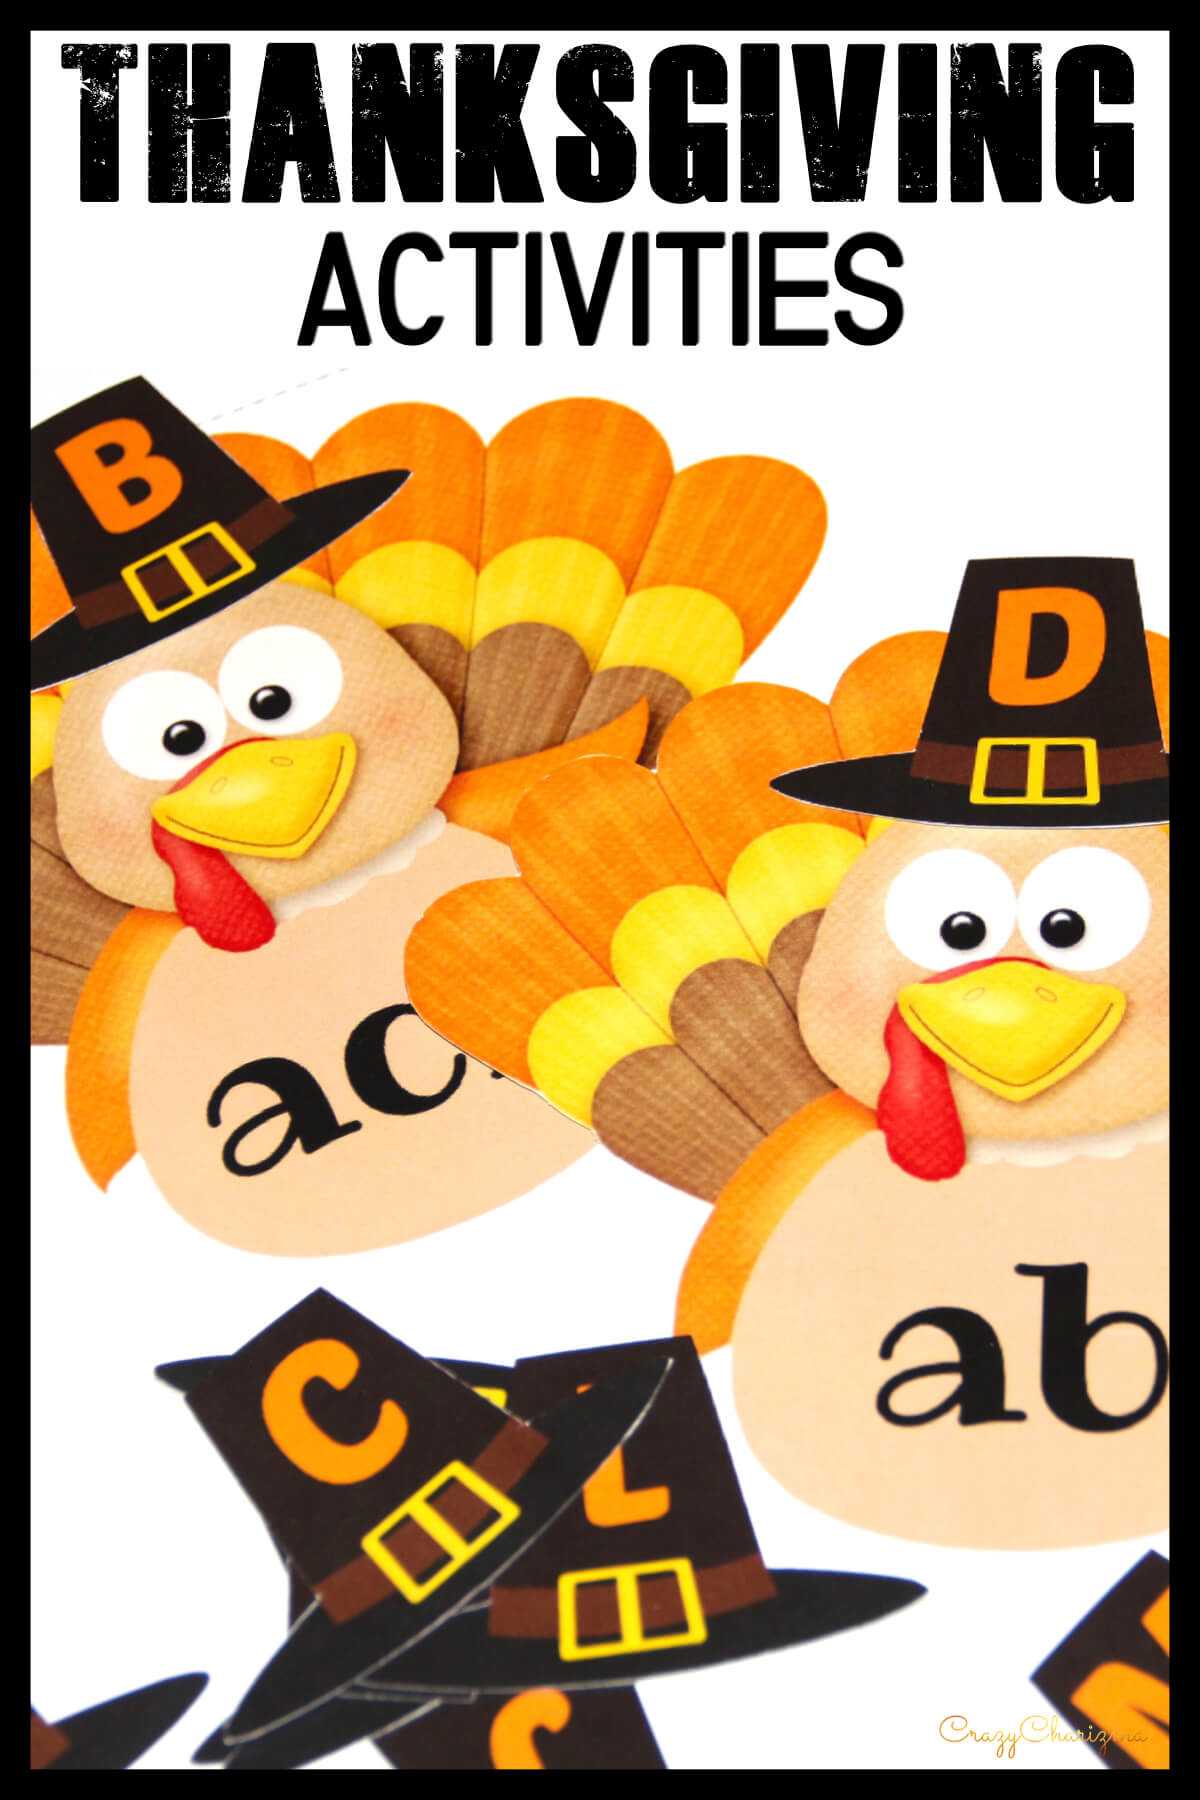 Practice phonics with these Thanksgiving activities - dress up the turkeys! These printables are perfect for kids in preschool, kindergarten, first and second grade.